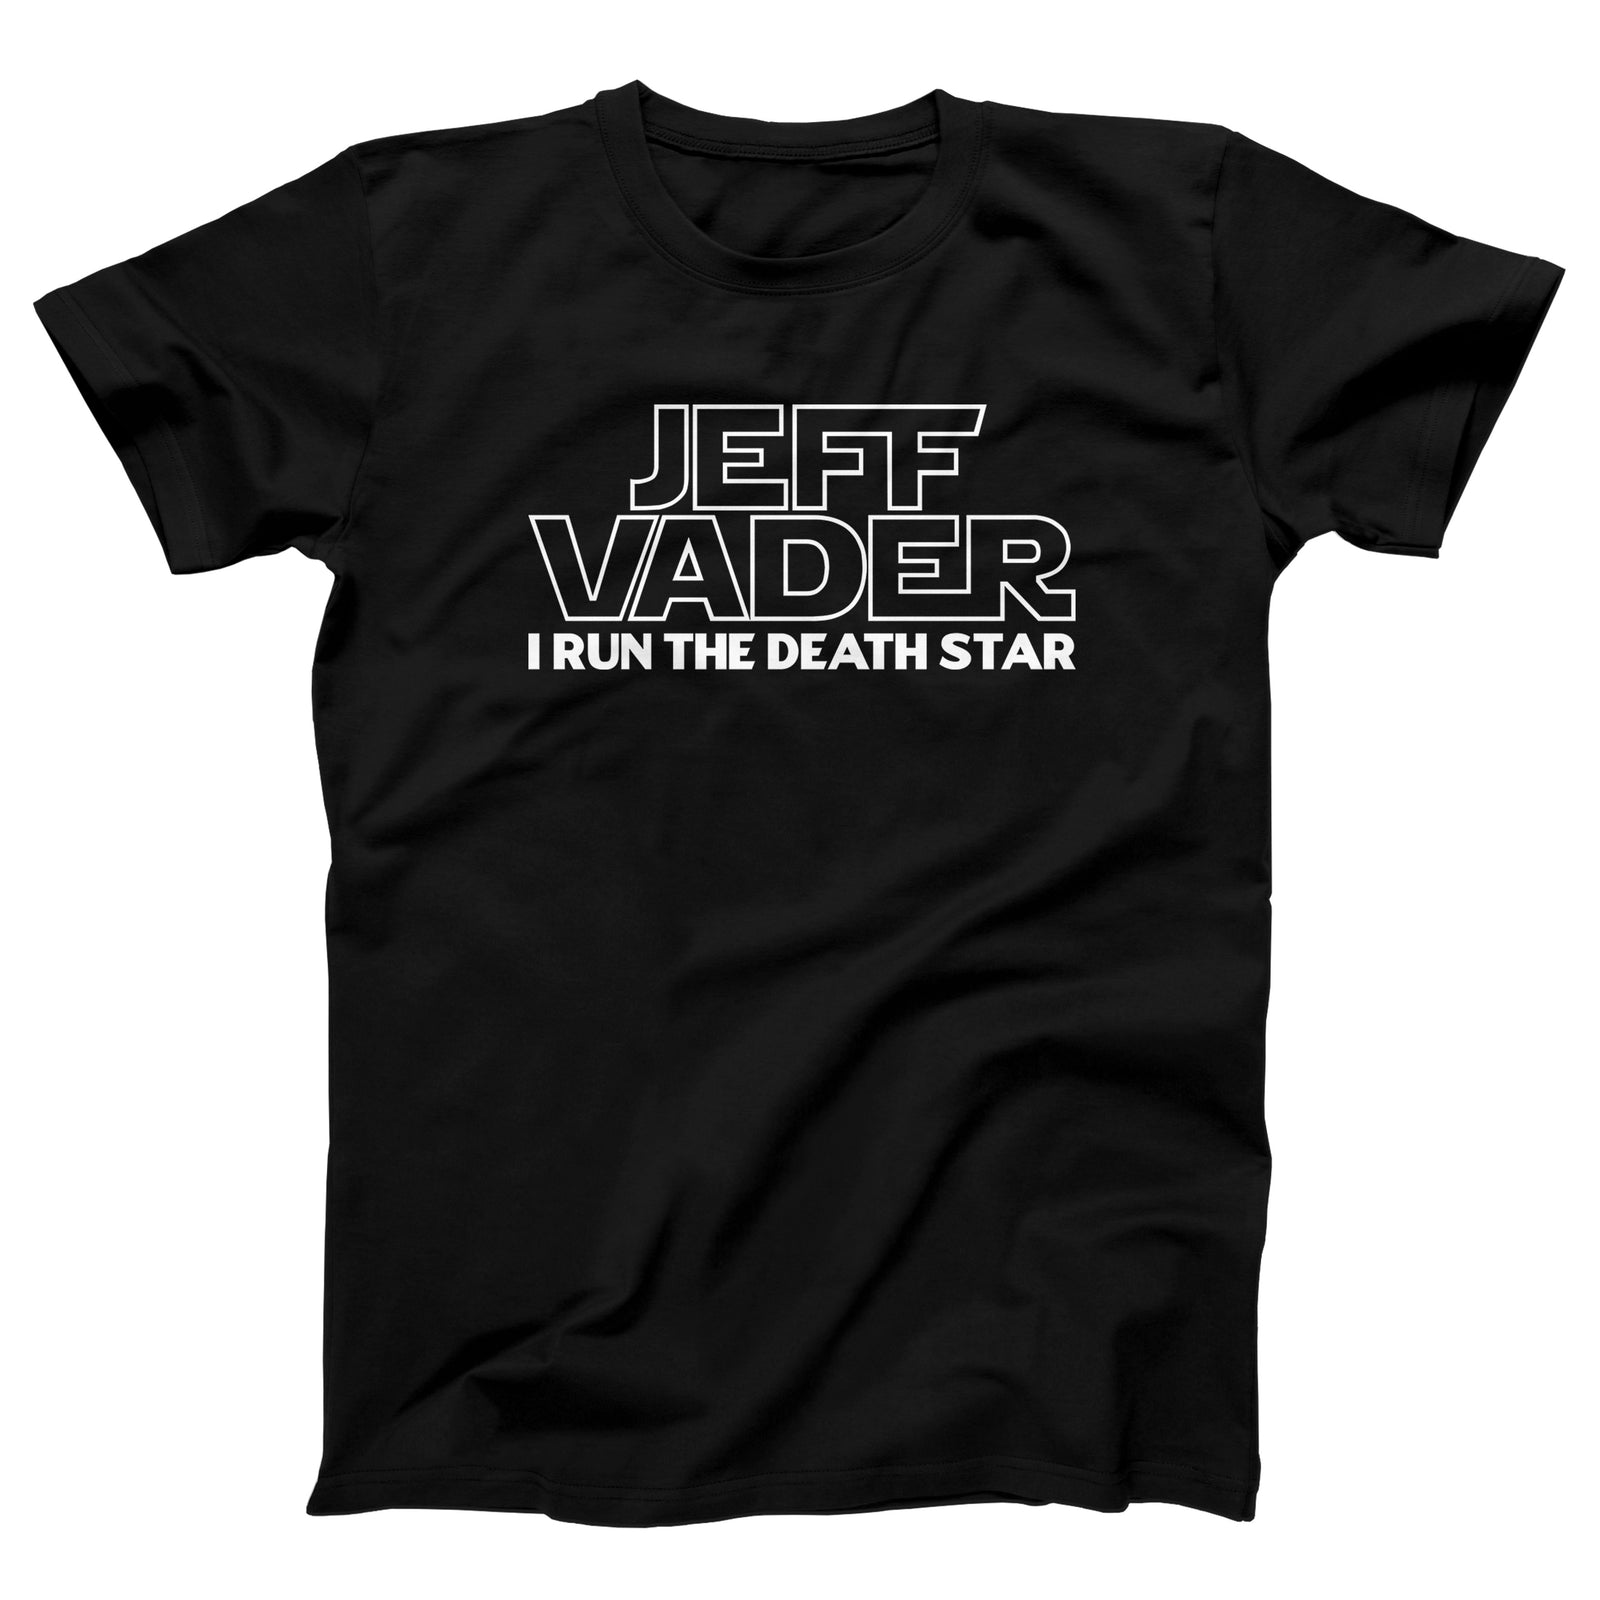 //cdn.shopify.com/s/files/1/0274/2488/2766/products/jeff-vader-menunisex-t-shirt-203762_5000x.jpg?v=1607899296 5000w,
    //cdn.shopify.com/s/files/1/0274/2488/2766/products/jeff-vader-menunisex-t-shirt-203762_4500x.jpg?v=1607899296 4500w,
    //cdn.shopify.com/s/files/1/0274/2488/2766/products/jeff-vader-menunisex-t-shirt-203762_4000x.jpg?v=1607899296 4000w,
    //cdn.shopify.com/s/files/1/0274/2488/2766/products/jeff-vader-menunisex-t-shirt-203762_3500x.jpg?v=1607899296 3500w,
    //cdn.shopify.com/s/files/1/0274/2488/2766/products/jeff-vader-menunisex-t-shirt-203762_3000x.jpg?v=1607899296 3000w,
    //cdn.shopify.com/s/files/1/0274/2488/2766/products/jeff-vader-menunisex-t-shirt-203762_2500x.jpg?v=1607899296 2500w,
    //cdn.shopify.com/s/files/1/0274/2488/2766/products/jeff-vader-menunisex-t-shirt-203762_2000x.jpg?v=1607899296 2000w,
    //cdn.shopify.com/s/files/1/0274/2488/2766/products/jeff-vader-menunisex-t-shirt-203762_1800x.jpg?v=1607899296 1800w,
    //cdn.shopify.com/s/files/1/0274/2488/2766/products/jeff-vader-menunisex-t-shirt-203762_1600x.jpg?v=1607899296 1600w,
    //cdn.shopify.com/s/files/1/0274/2488/2766/products/jeff-vader-menunisex-t-shirt-203762_1400x.jpg?v=1607899296 1400w,
    //cdn.shopify.com/s/files/1/0274/2488/2766/products/jeff-vader-menunisex-t-shirt-203762_1200x.jpg?v=1607899296 1200w,
    //cdn.shopify.com/s/files/1/0274/2488/2766/products/jeff-vader-menunisex-t-shirt-203762_1000x.jpg?v=1607899296 1000w,
    //cdn.shopify.com/s/files/1/0274/2488/2766/products/jeff-vader-menunisex-t-shirt-203762_800x.jpg?v=1607899296 800w,
    //cdn.shopify.com/s/files/1/0274/2488/2766/products/jeff-vader-menunisex-t-shirt-203762_600x.jpg?v=1607899296 600w,
    //cdn.shopify.com/s/files/1/0274/2488/2766/products/jeff-vader-menunisex-t-shirt-203762_400x.jpg?v=1607899296 400w,
    //cdn.shopify.com/s/files/1/0274/2488/2766/products/jeff-vader-menunisex-t-shirt-203762_200x.jpg?v=1607899296 200w